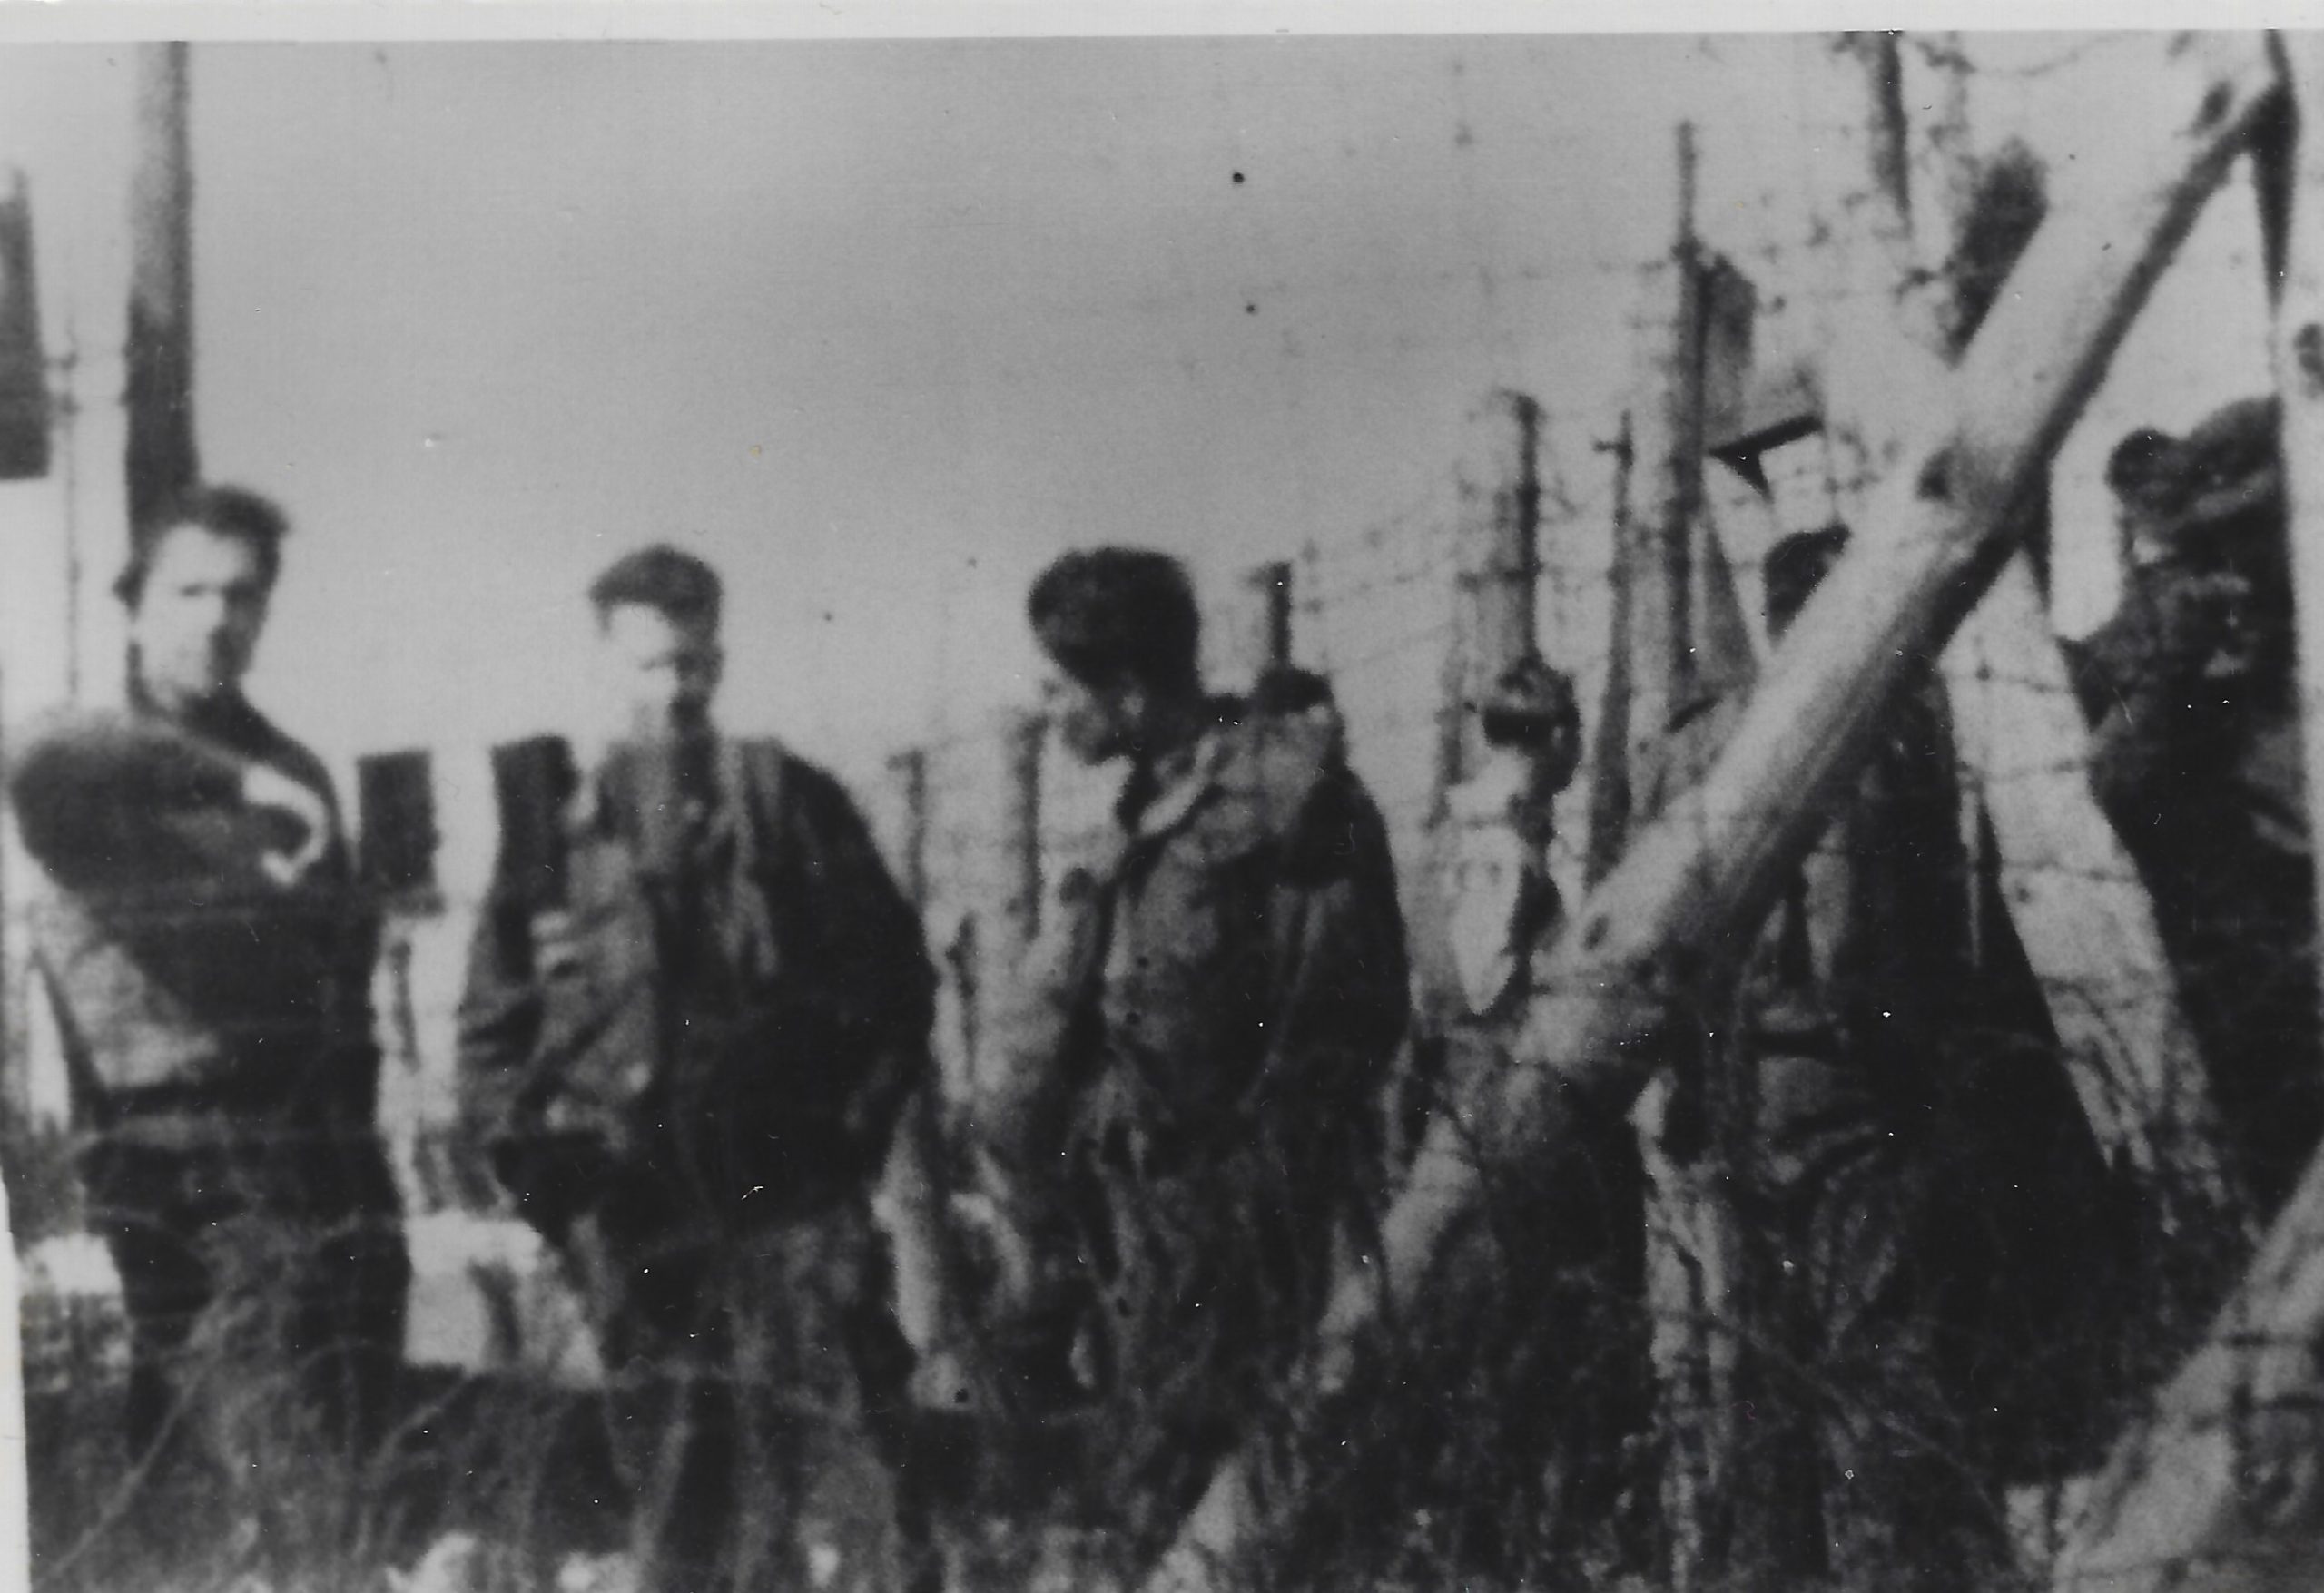 Image of people behind the barbed wire at a Prisoner of War Camp